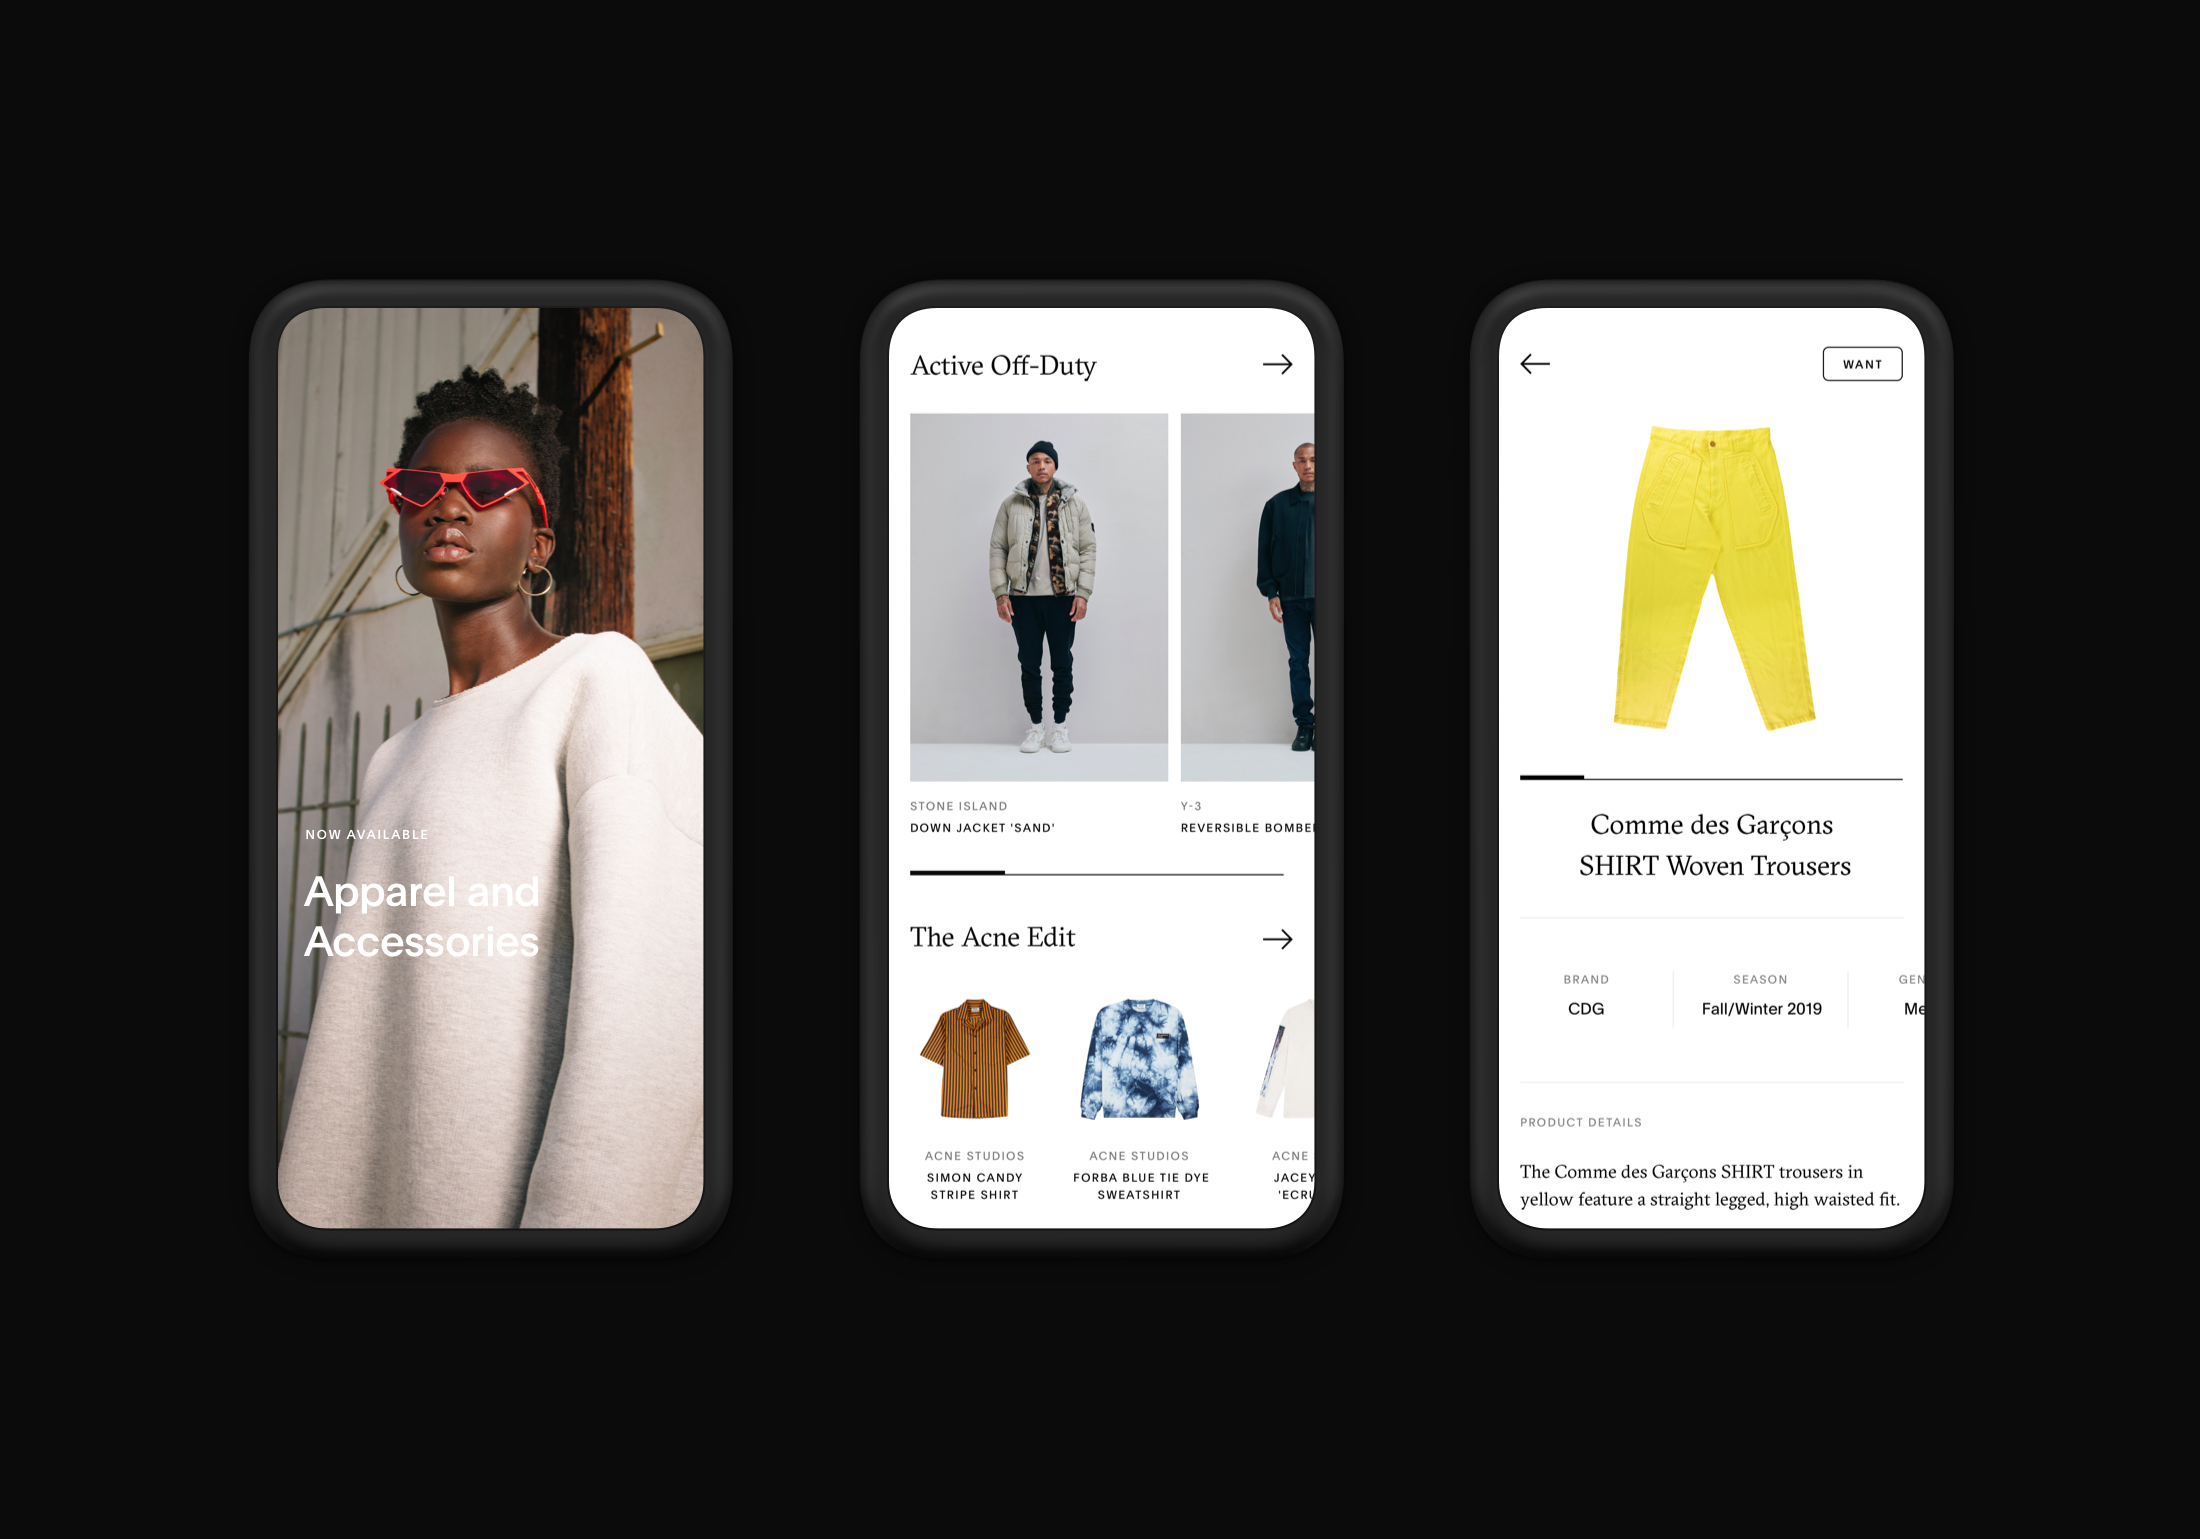 Users Can Now Buy Apparel & Accessories On GOAT